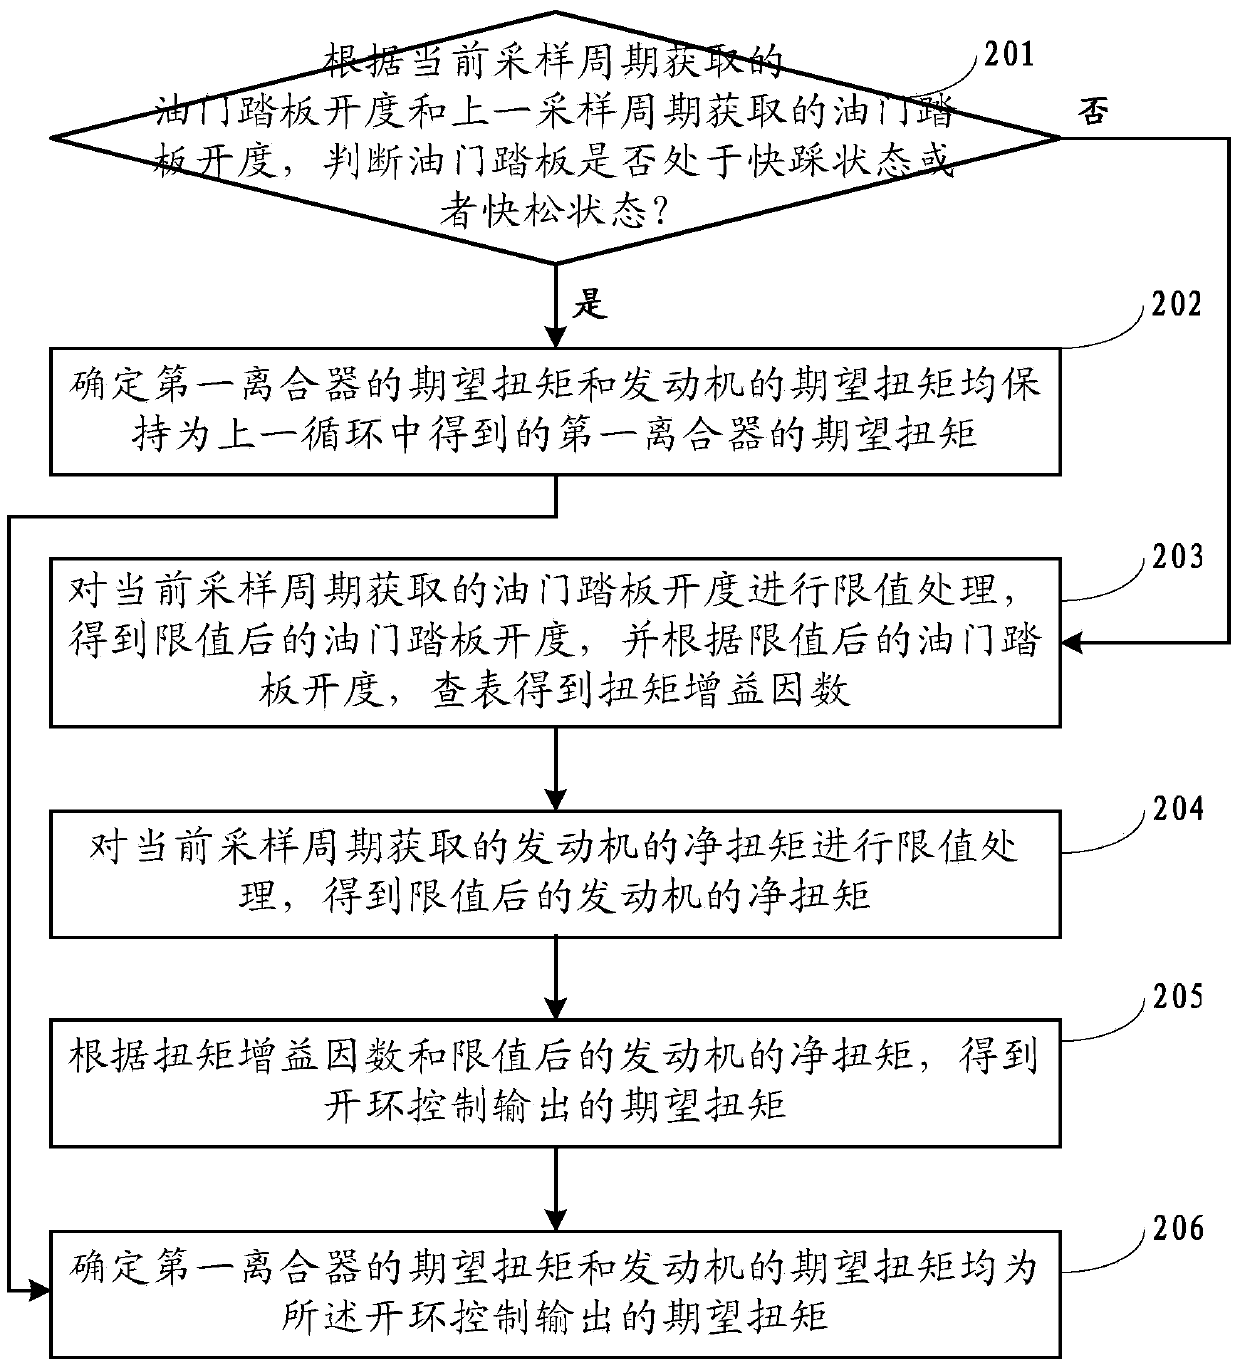 Method for controlling normal starting of dual-clutch automatic transmission